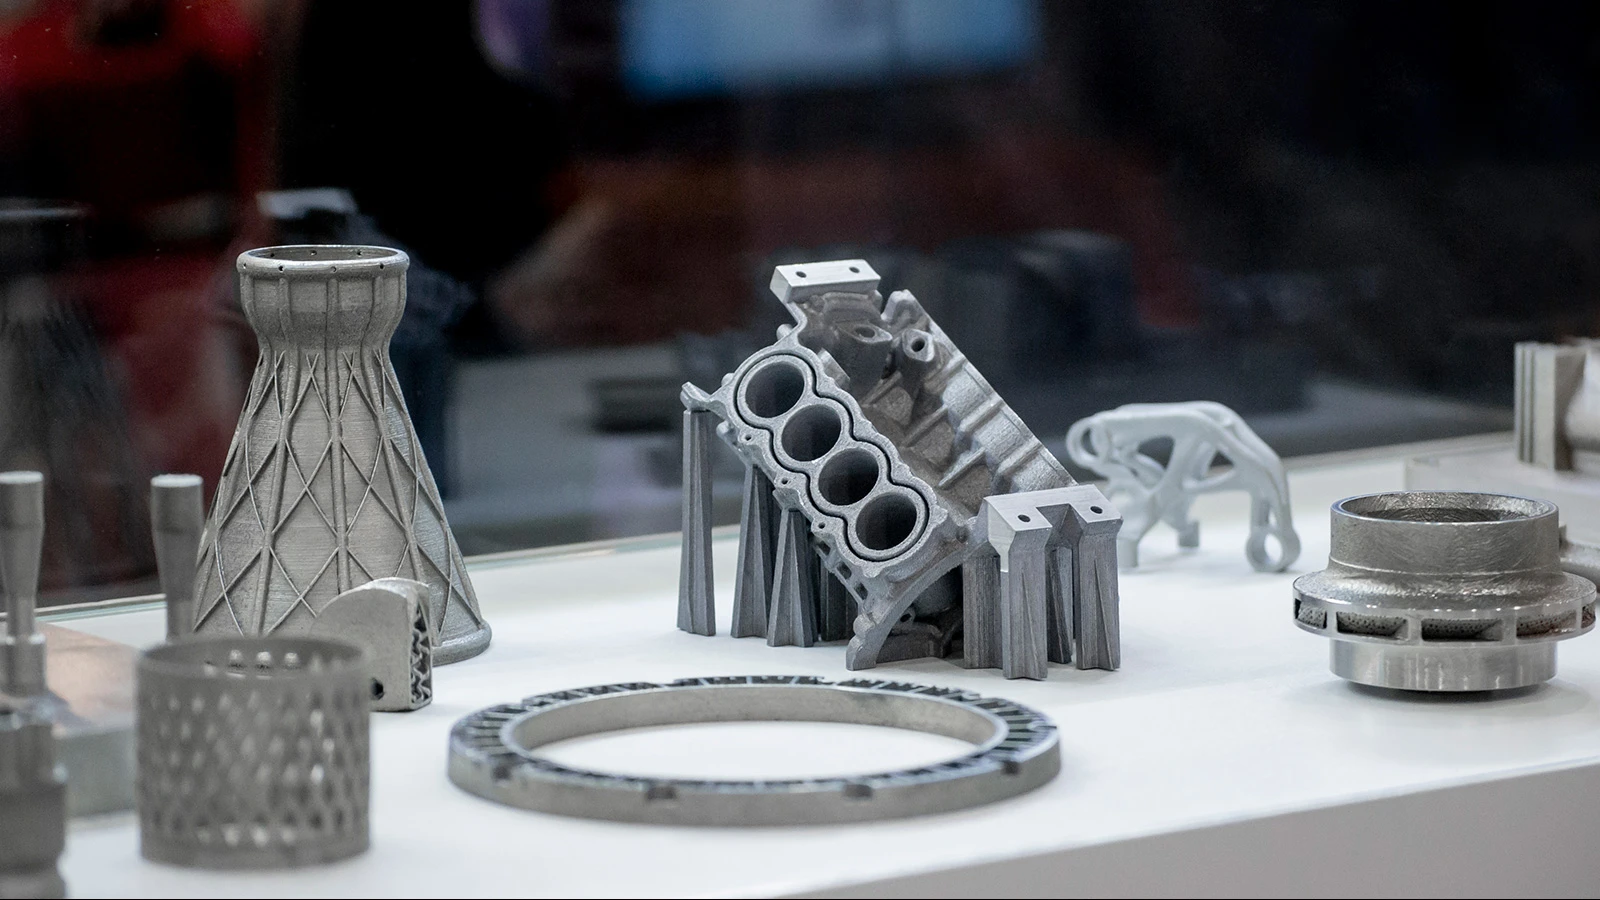 A New Batch of 3D Printers Can Print Models in Half the Time